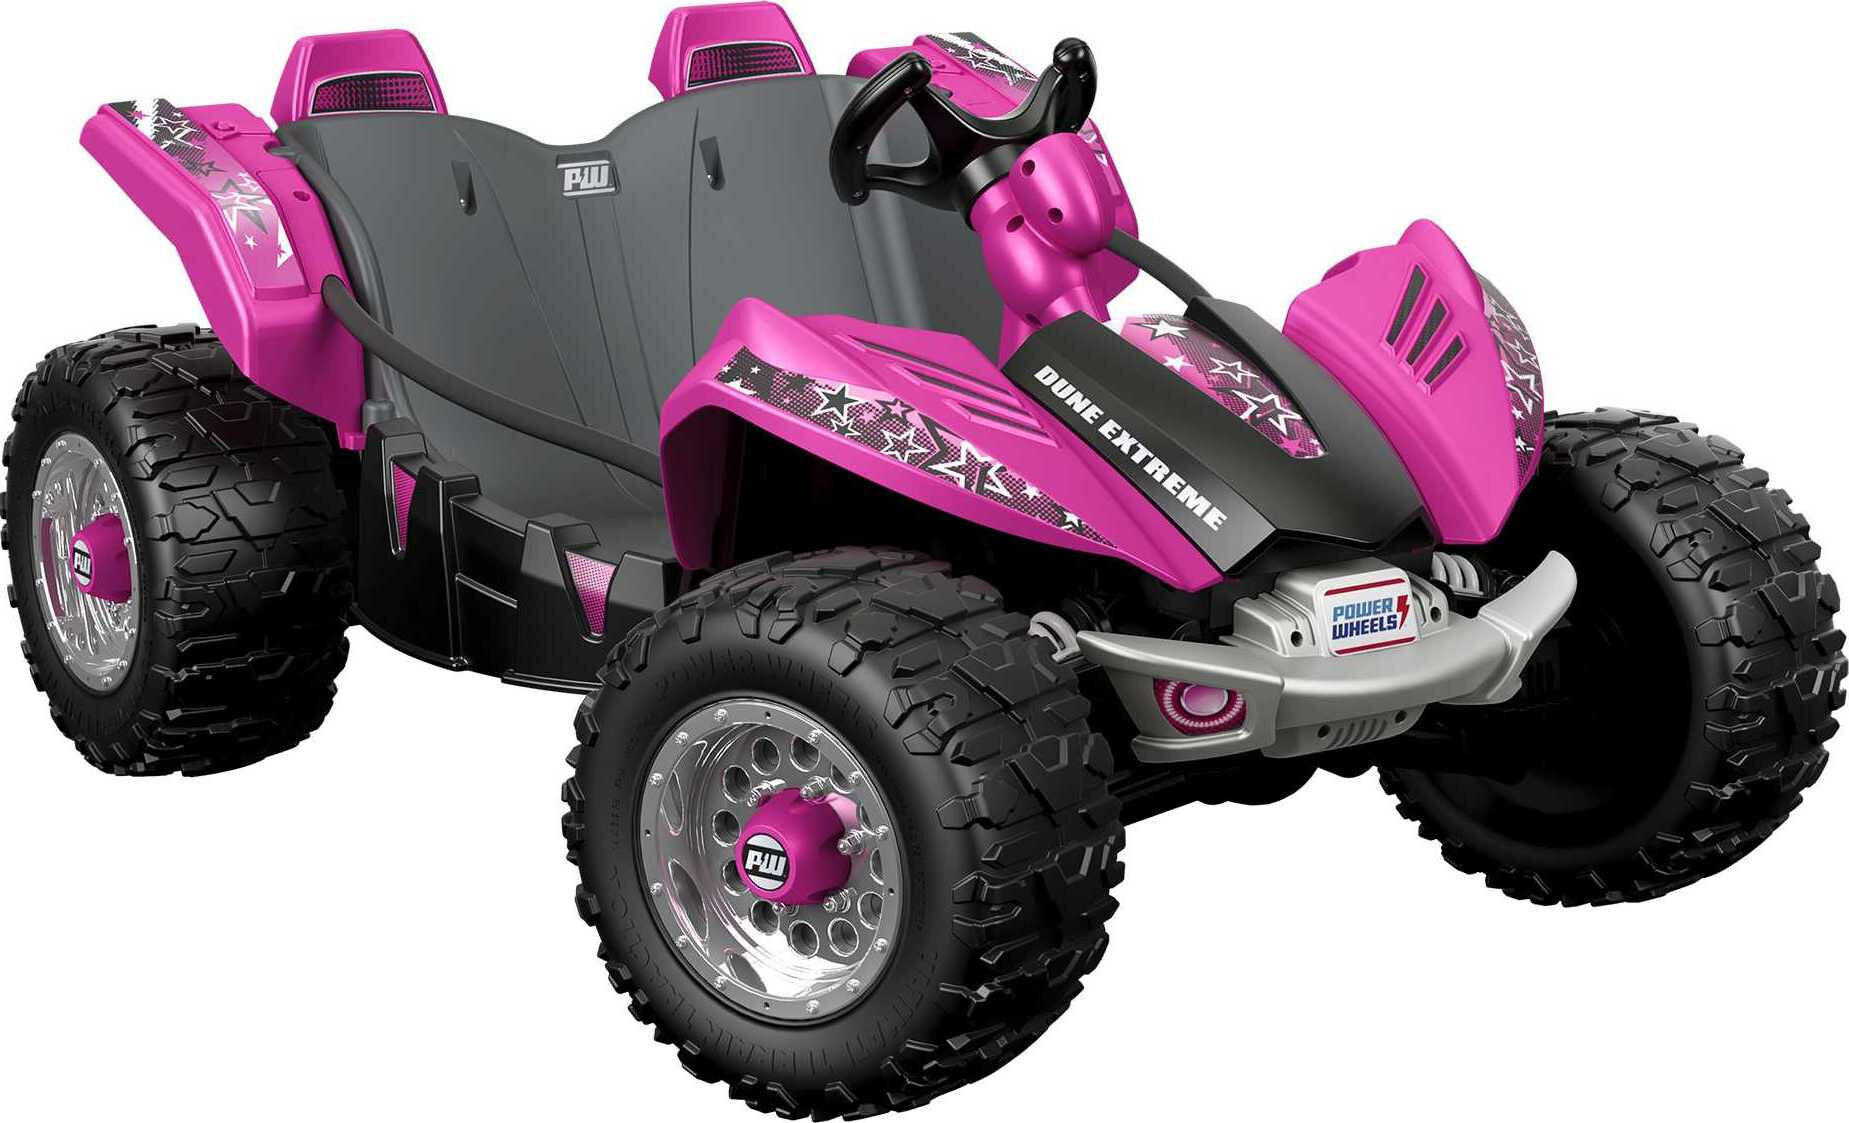 Power Wheels Dune Racer Extreme Battery-Powered Ride-on Vehicle with Charger, Pink, 12 V, Max Speed: 5 mph - image 1 of 7